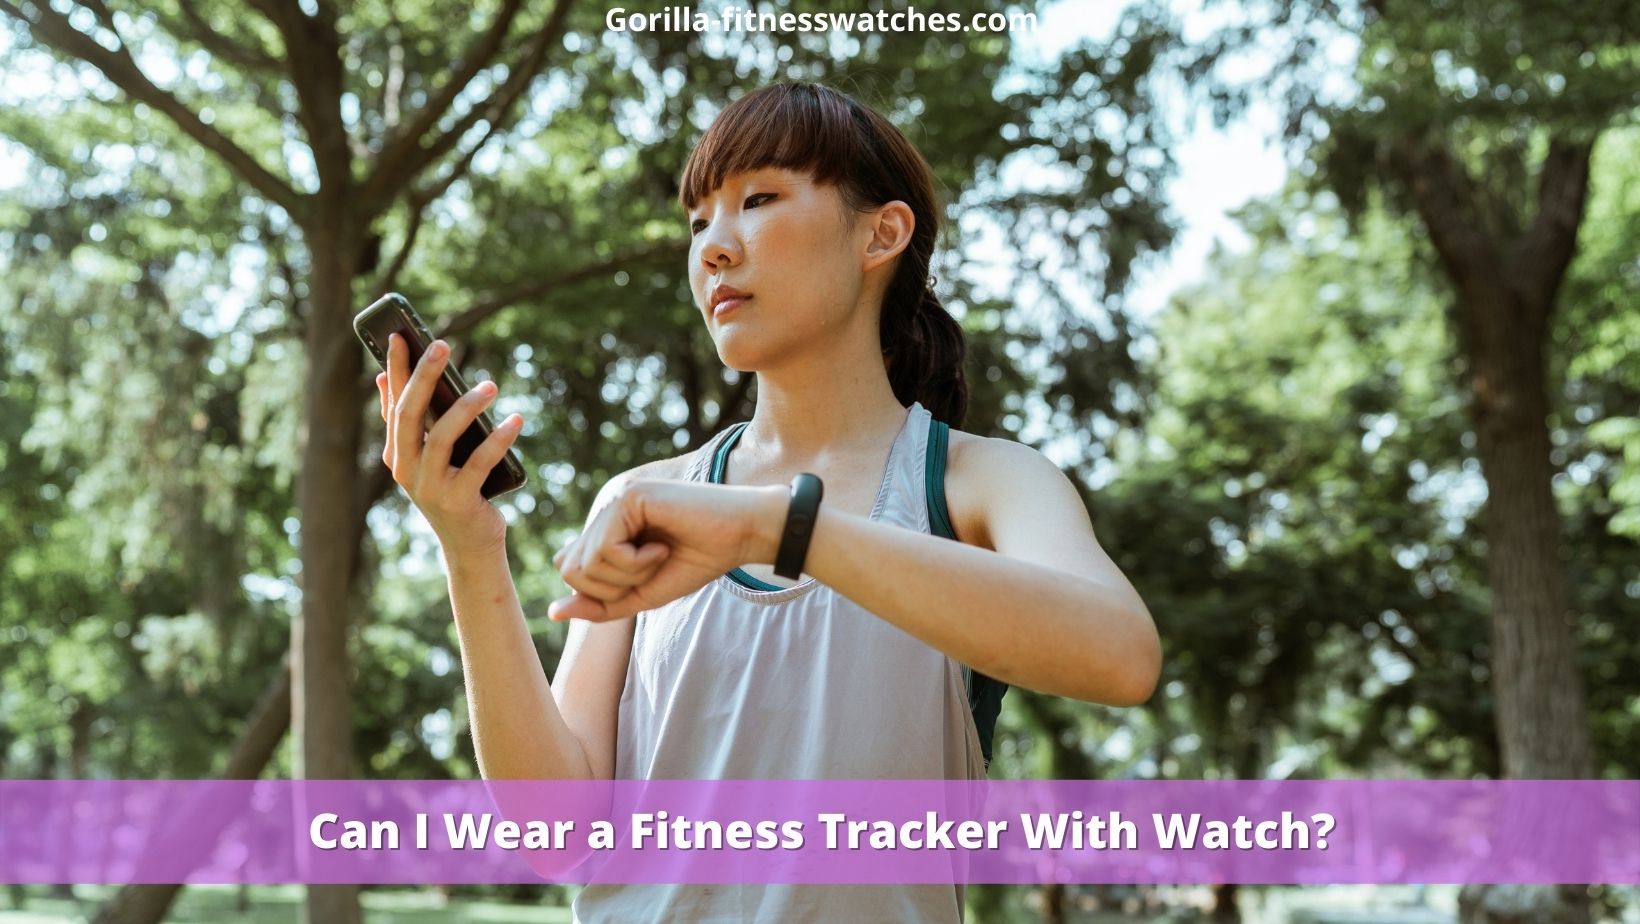 Can I Wear a Fitness Tracker With Watch?